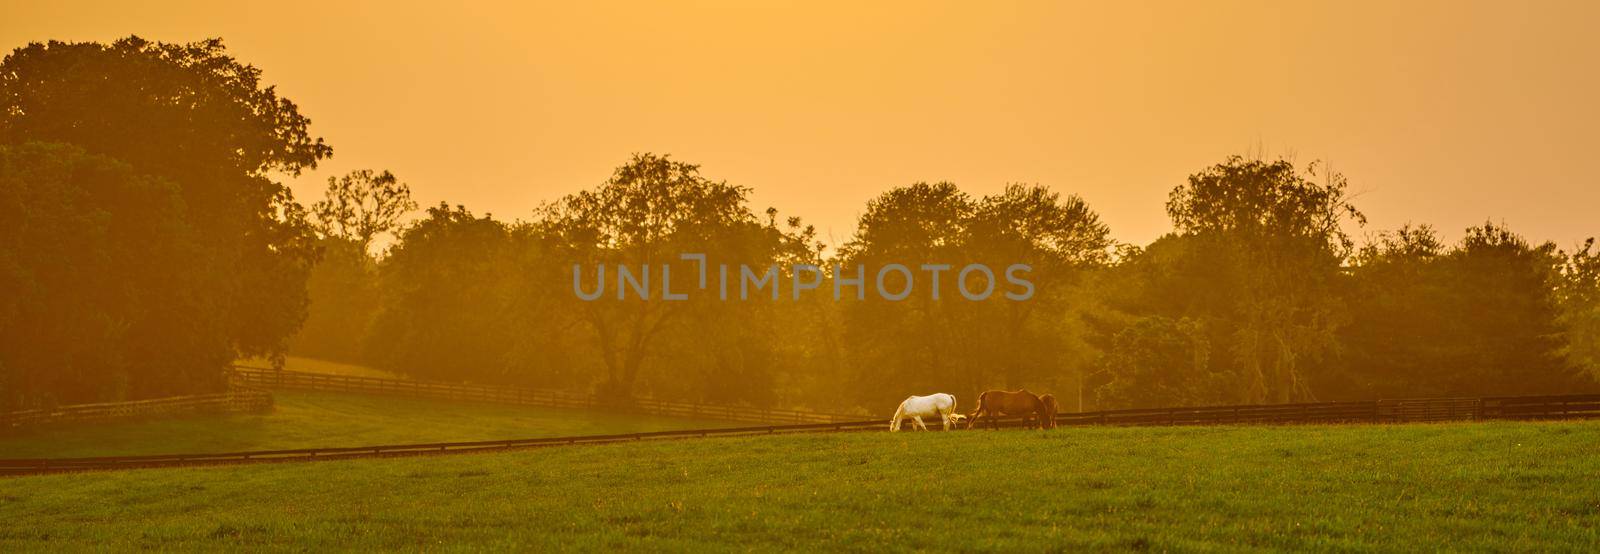 Hazy sunset with horses grazing in a field.